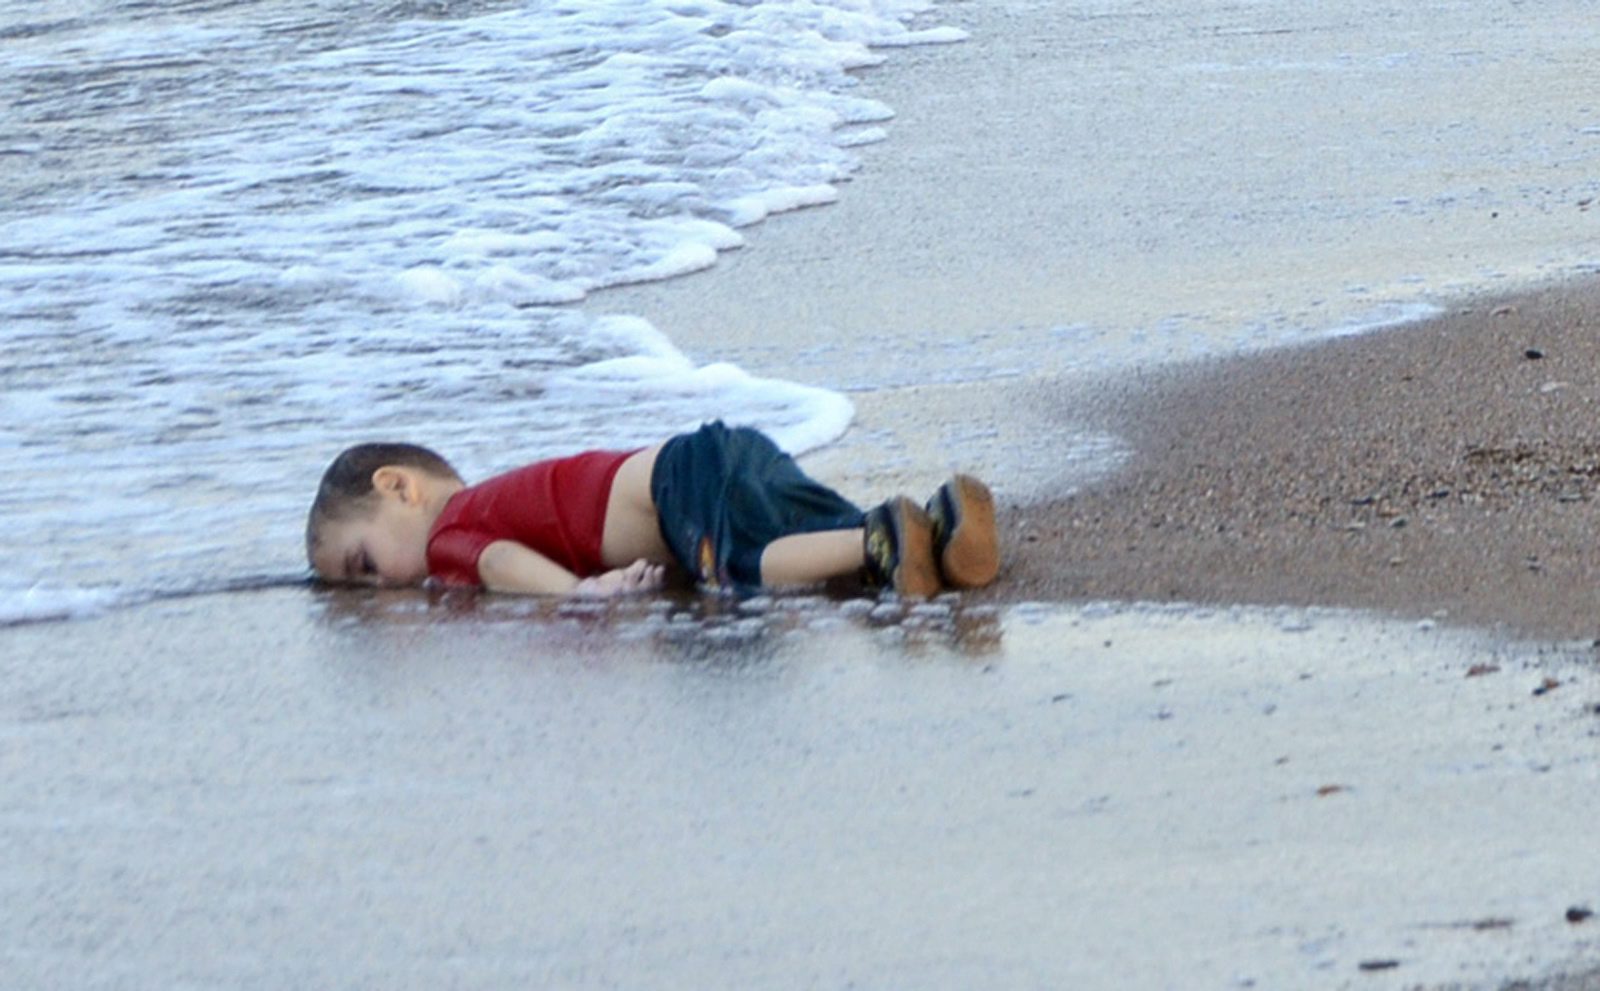 PHOTO: The body of of three-year-old Syrian refugee boy Aylan Kurdi is seen washed up on the shore in the coastal town of Bodrum, Mugla city, Turkey on Sept. 2, 2015.